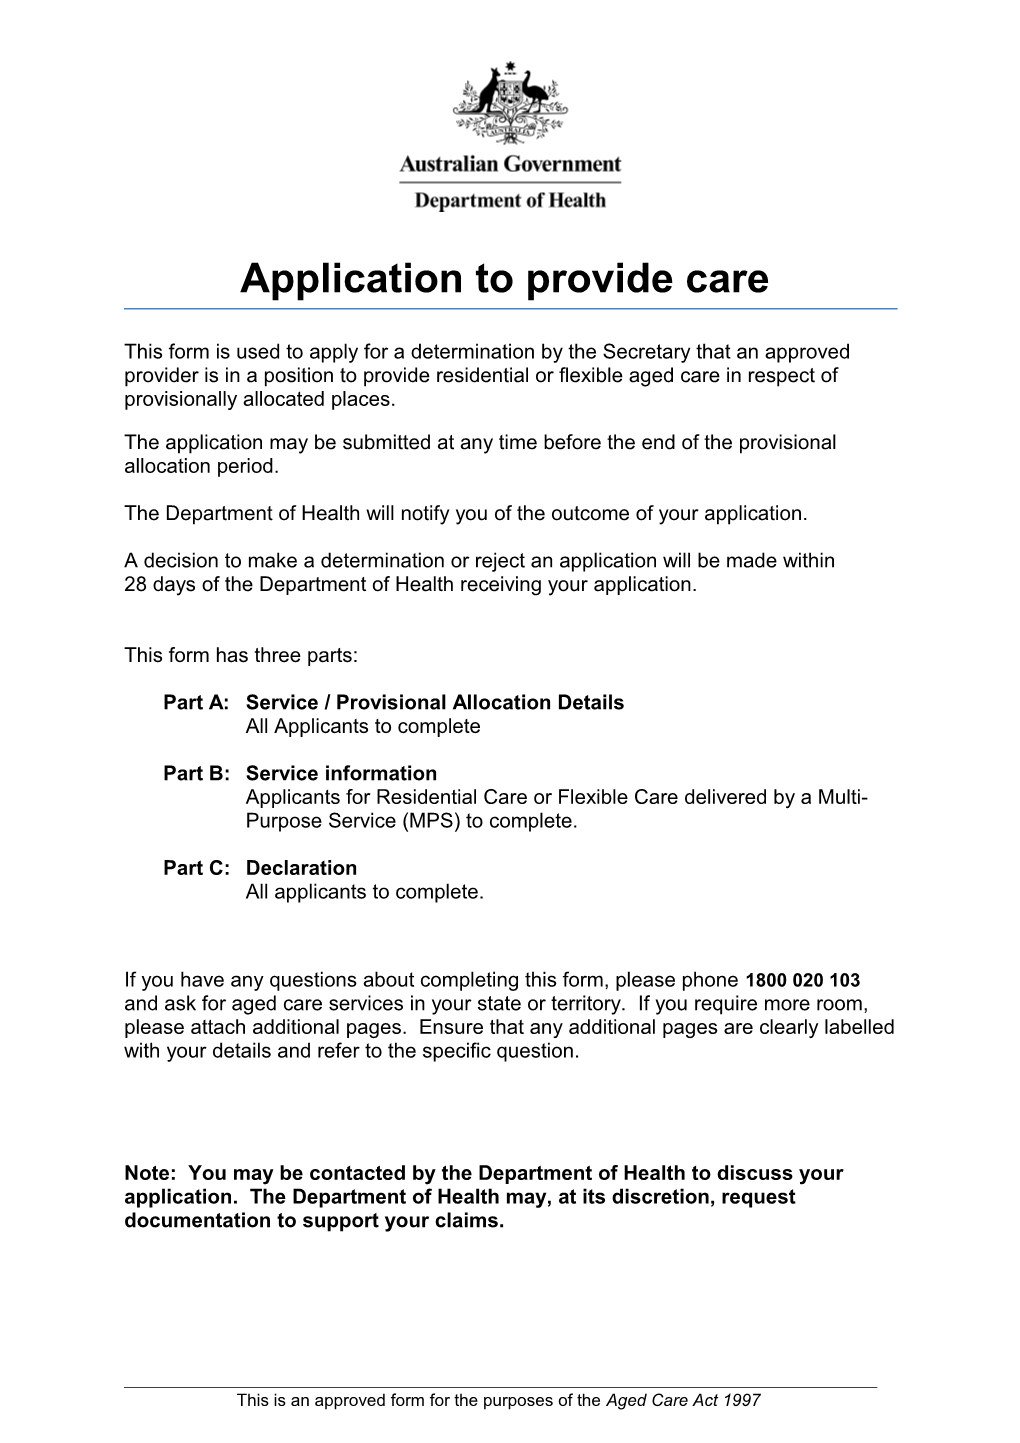 Application to Provide Care